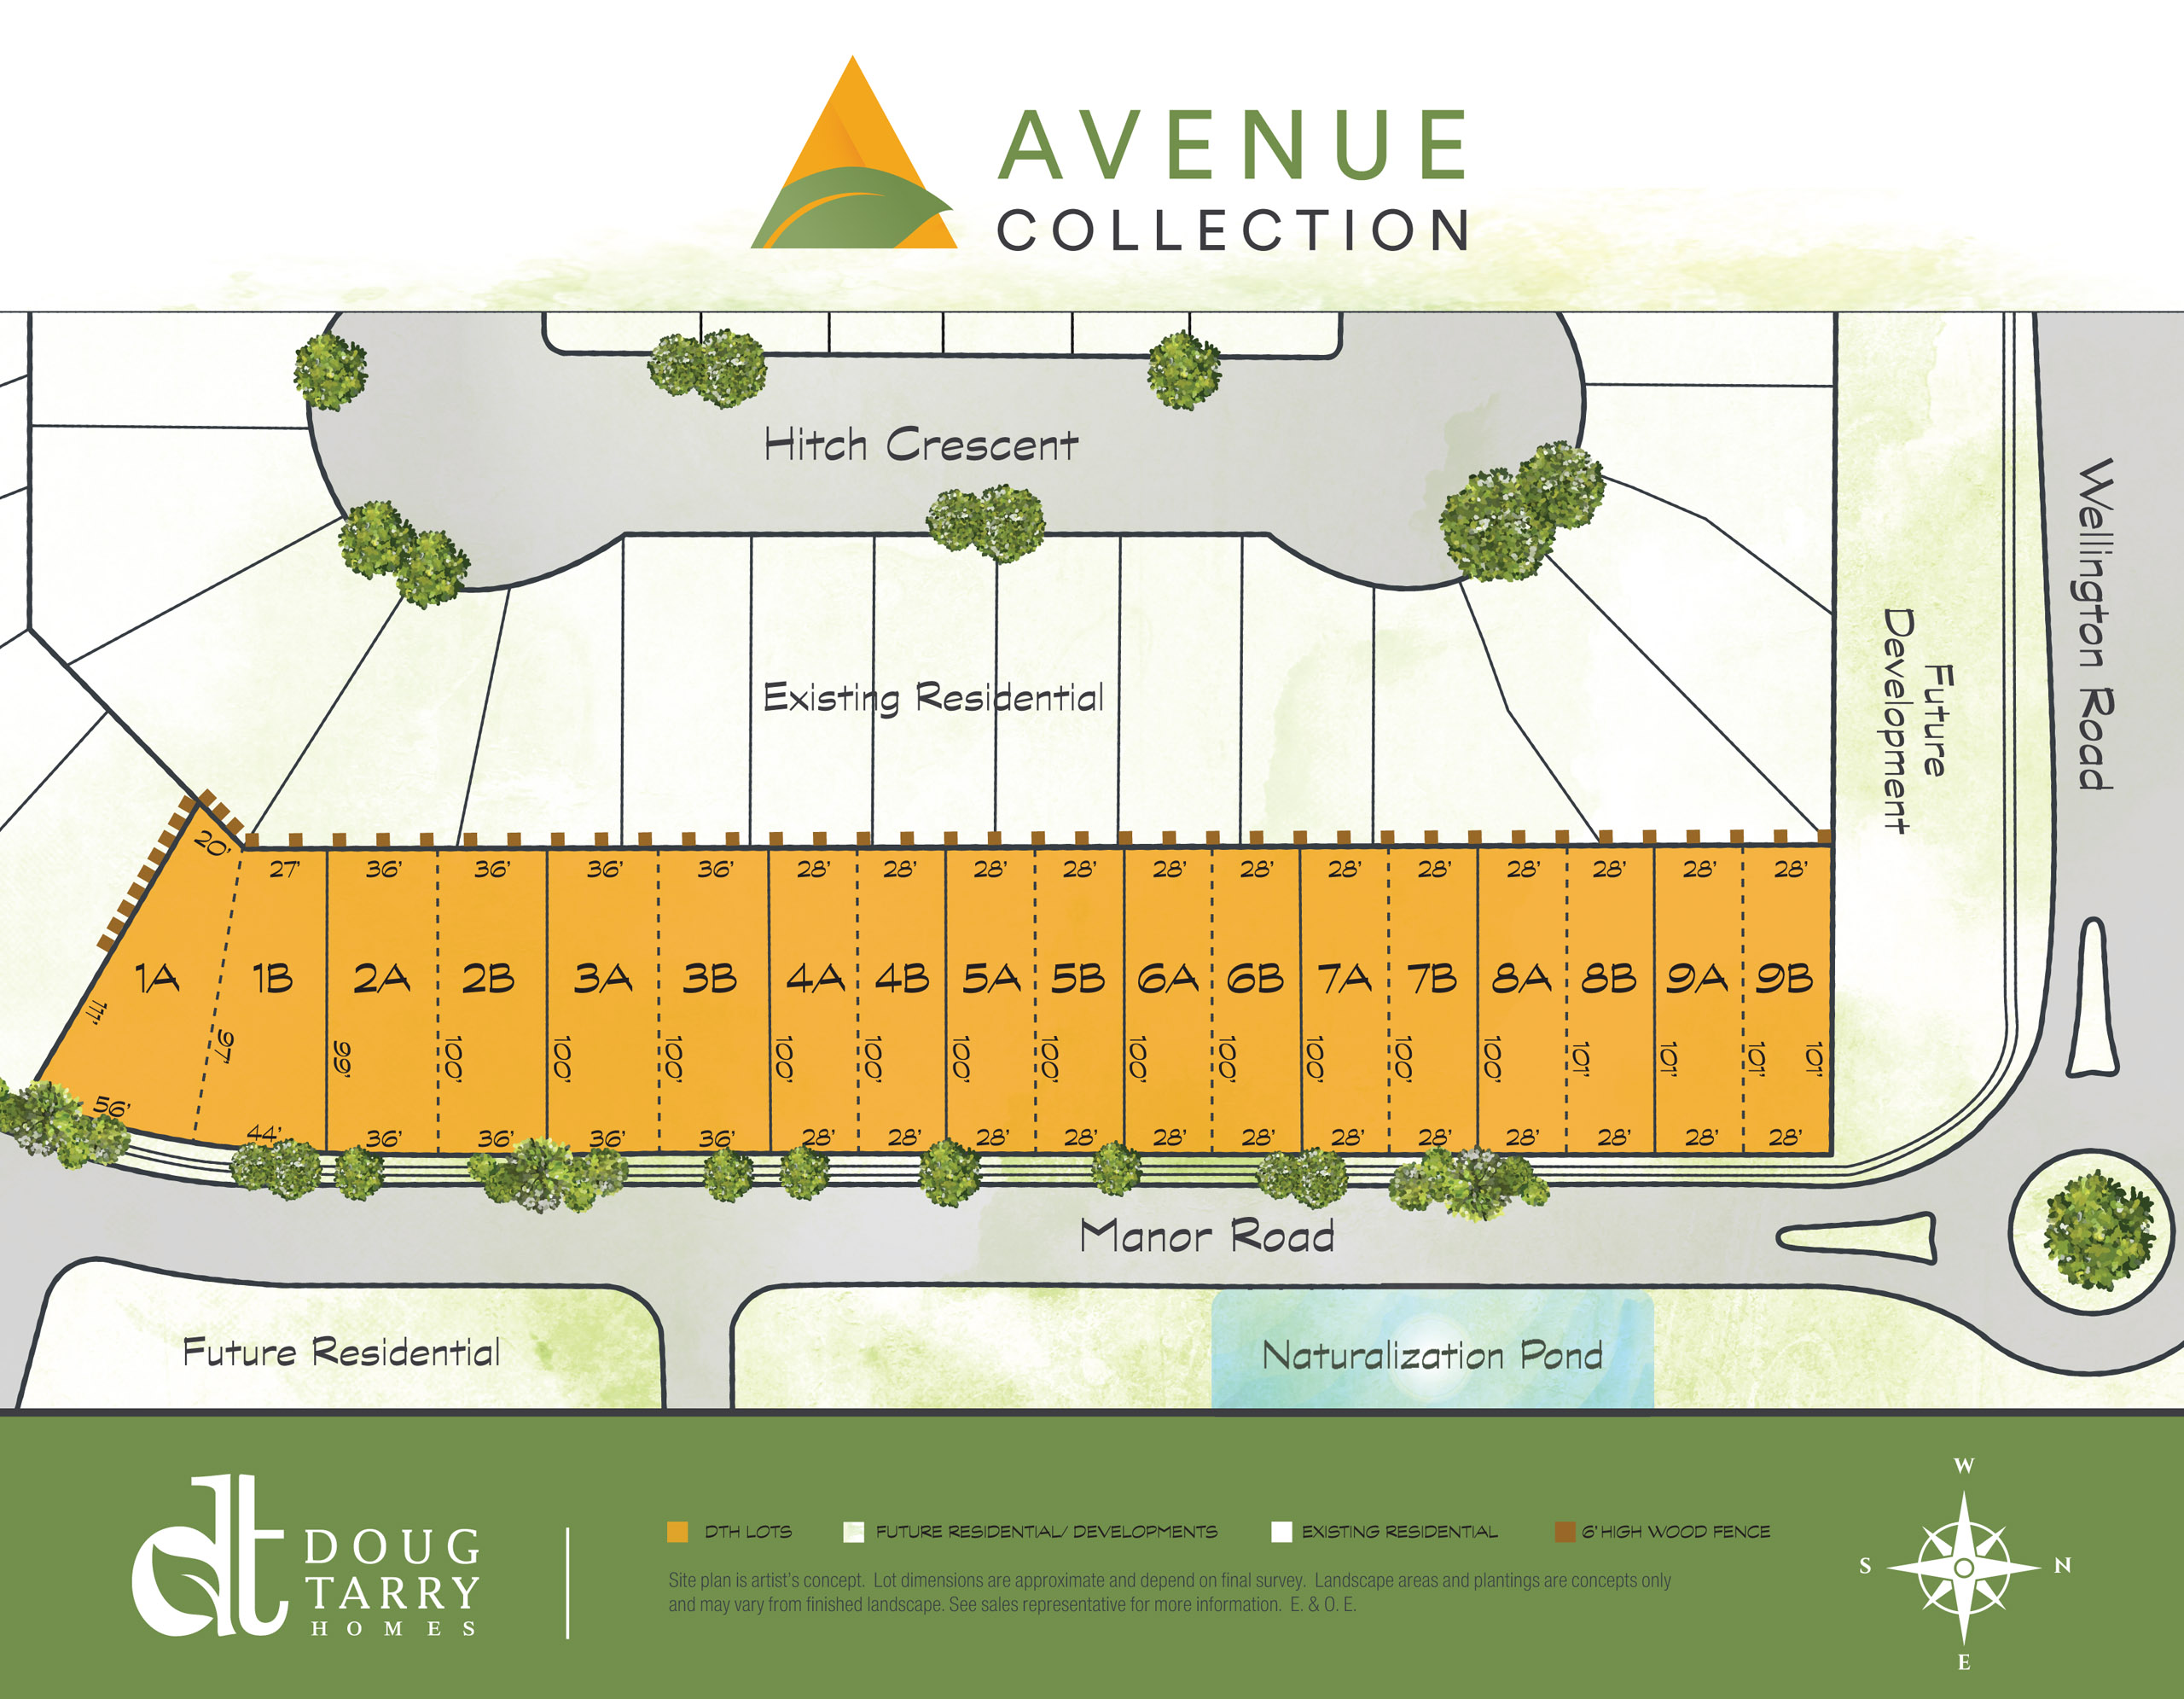 The Avenue Collection, St. Thomas